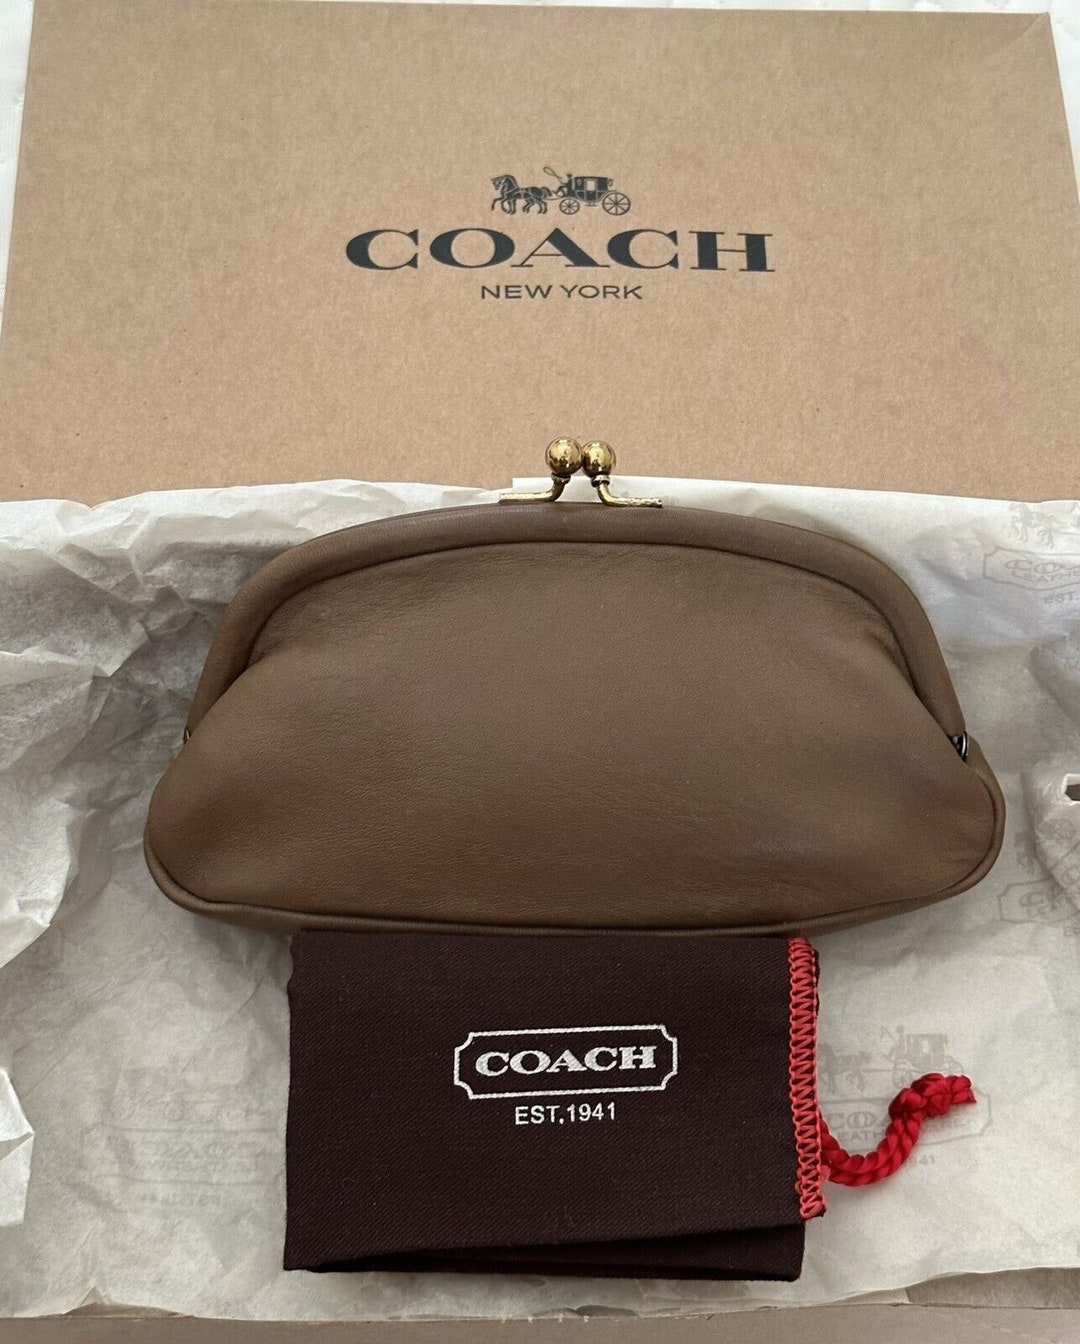 LIKE NEW Vintage Coach Kisslock Change Purse 6903 Red - Etsy